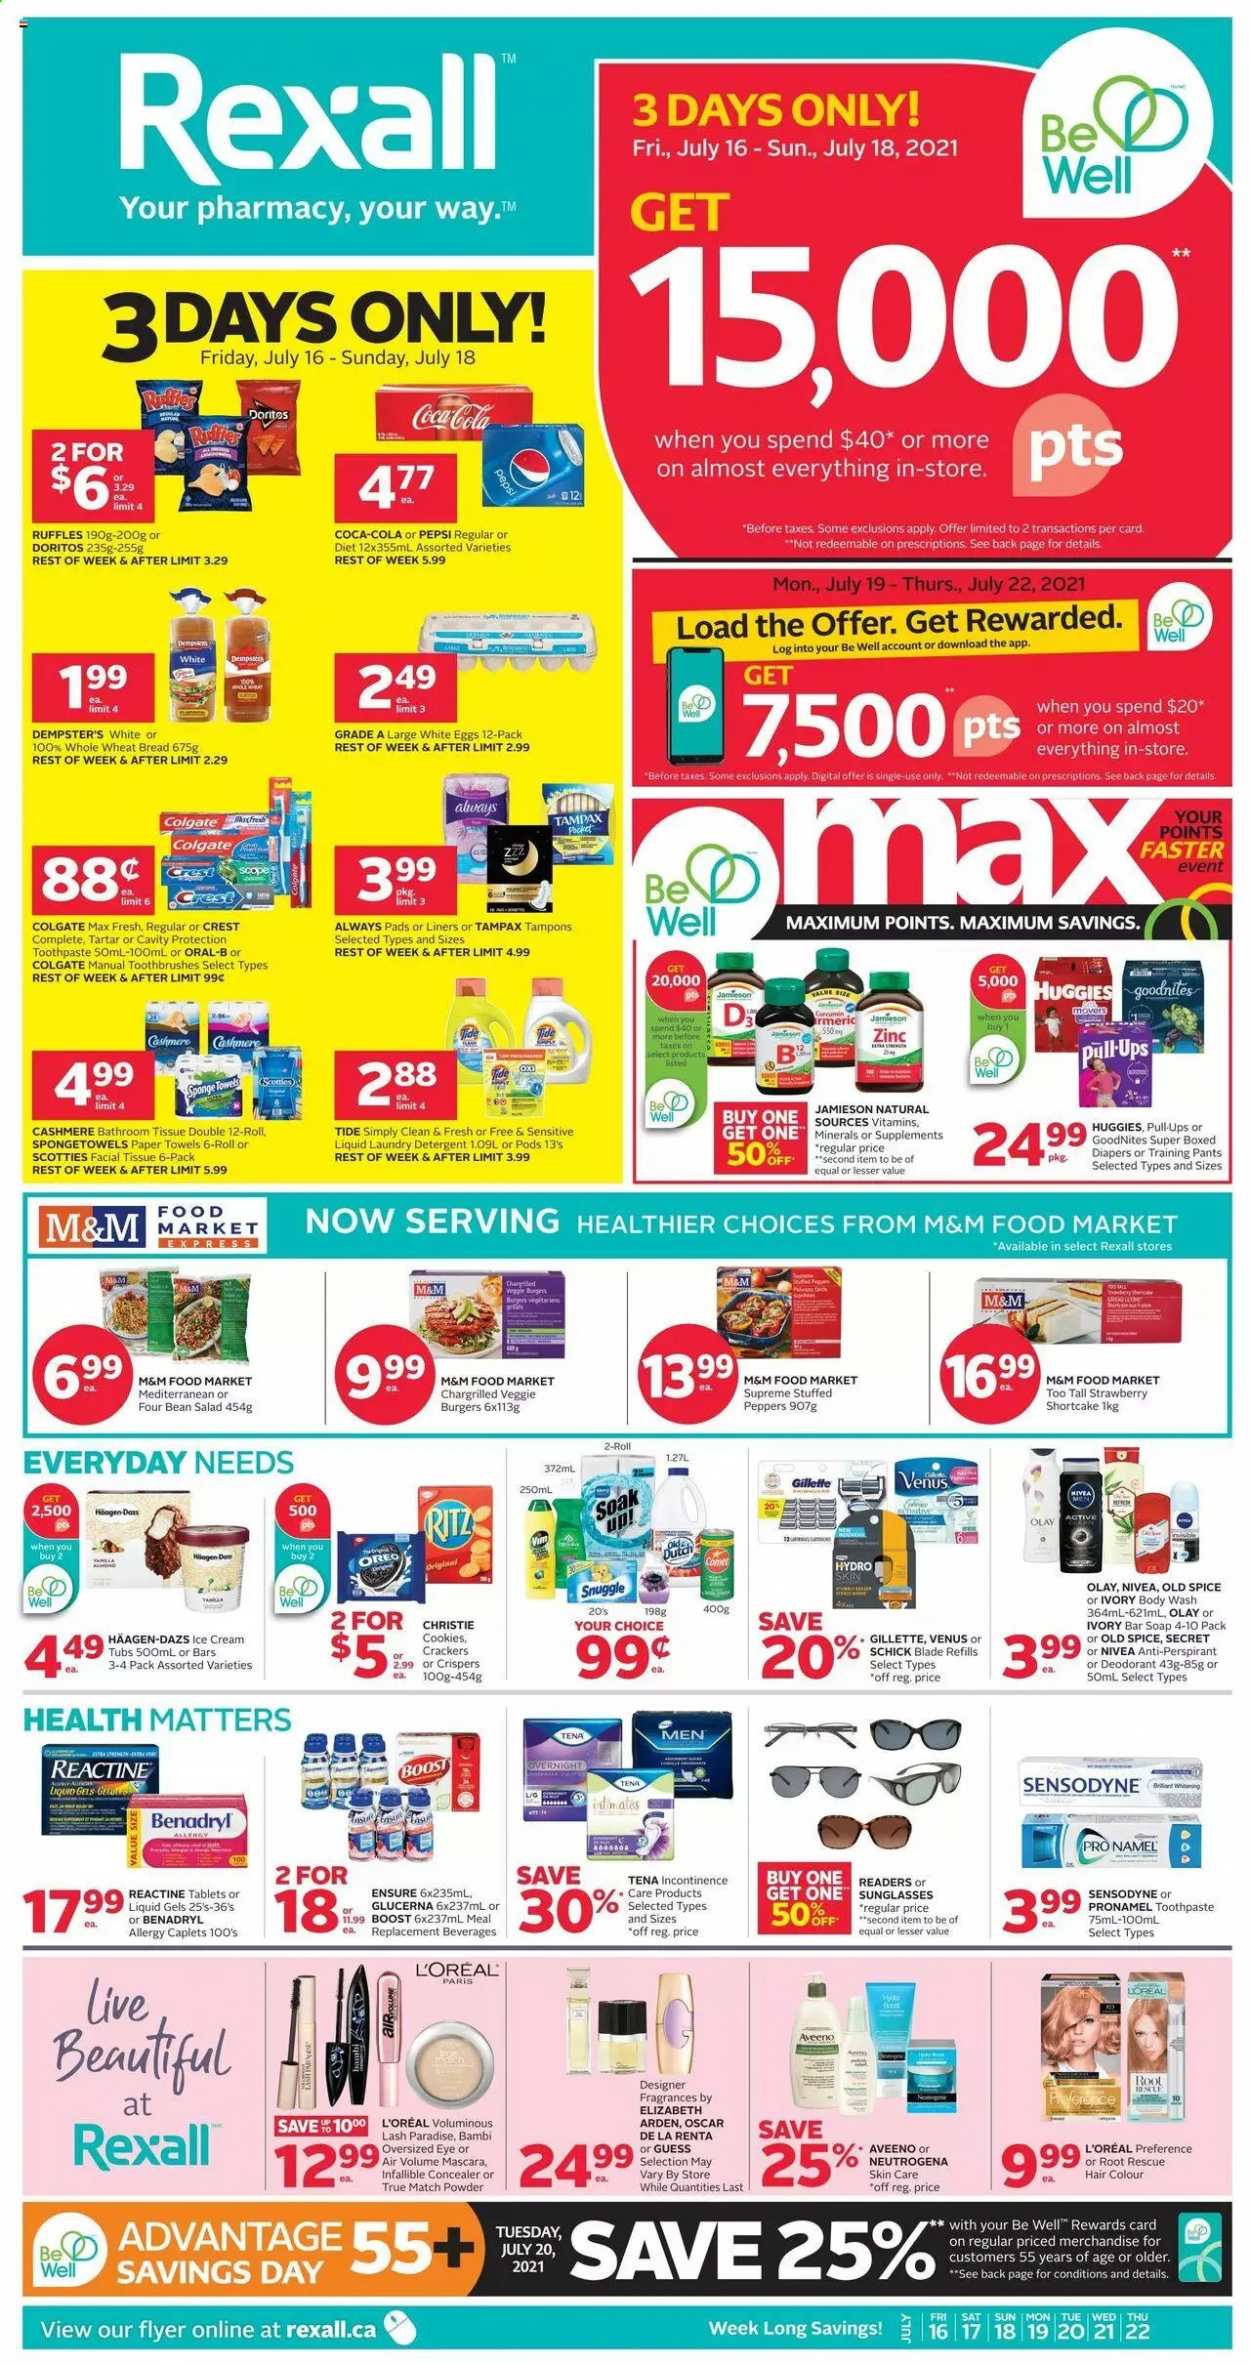 thumbnail - Rexall Flyer - July 16, 2021 - July 22, 2021 - Sales products - cookies, crackers, RITZ, Doritos, Ruffles, peppers, spice, Coca-Cola, Pepsi, Boost, pants, nappies, baby pants, Aveeno, bath tissue, kitchen towels, paper towels, Snuggle, Tide, laundry detergent, body wash, soap bar, soap, toothpaste, Crest, Always pads, sanitary pads, tampons, L’Oréal, Olay, hair color, anti-perspirant, Guess, Schick, Venus, corrector, Glucerna, zinc, Oreo, Gillette, mascara, Neutrogena, Tampax, Huggies, Nivea, Old Spice, Oral-B, Sensodyne, M&M's, deodorant. Page 1.